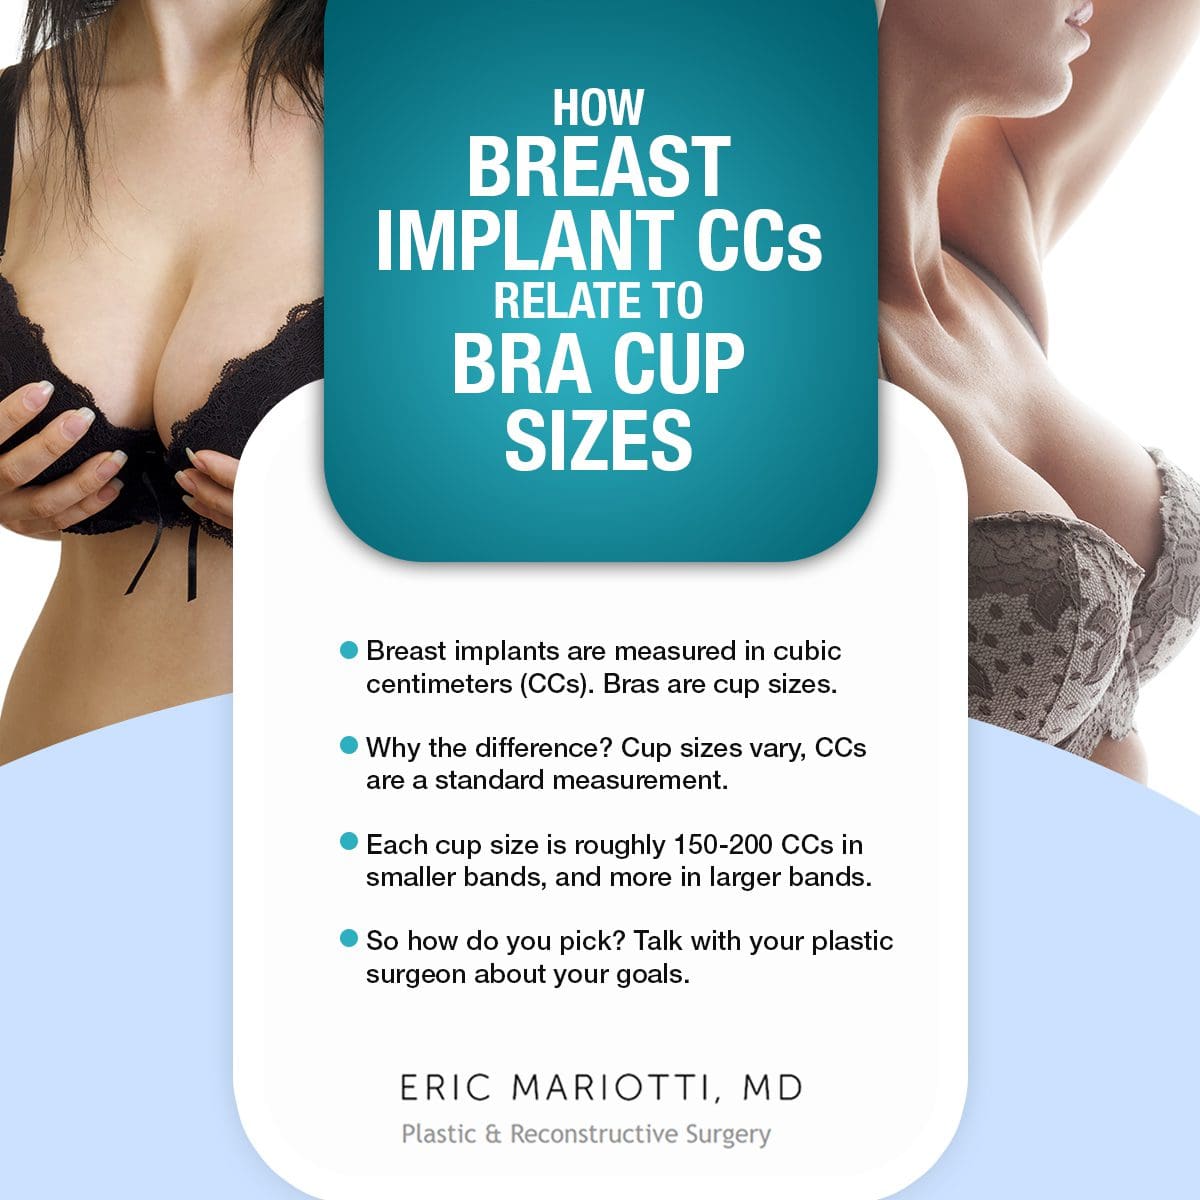 How many CCs are in a bra cup size?